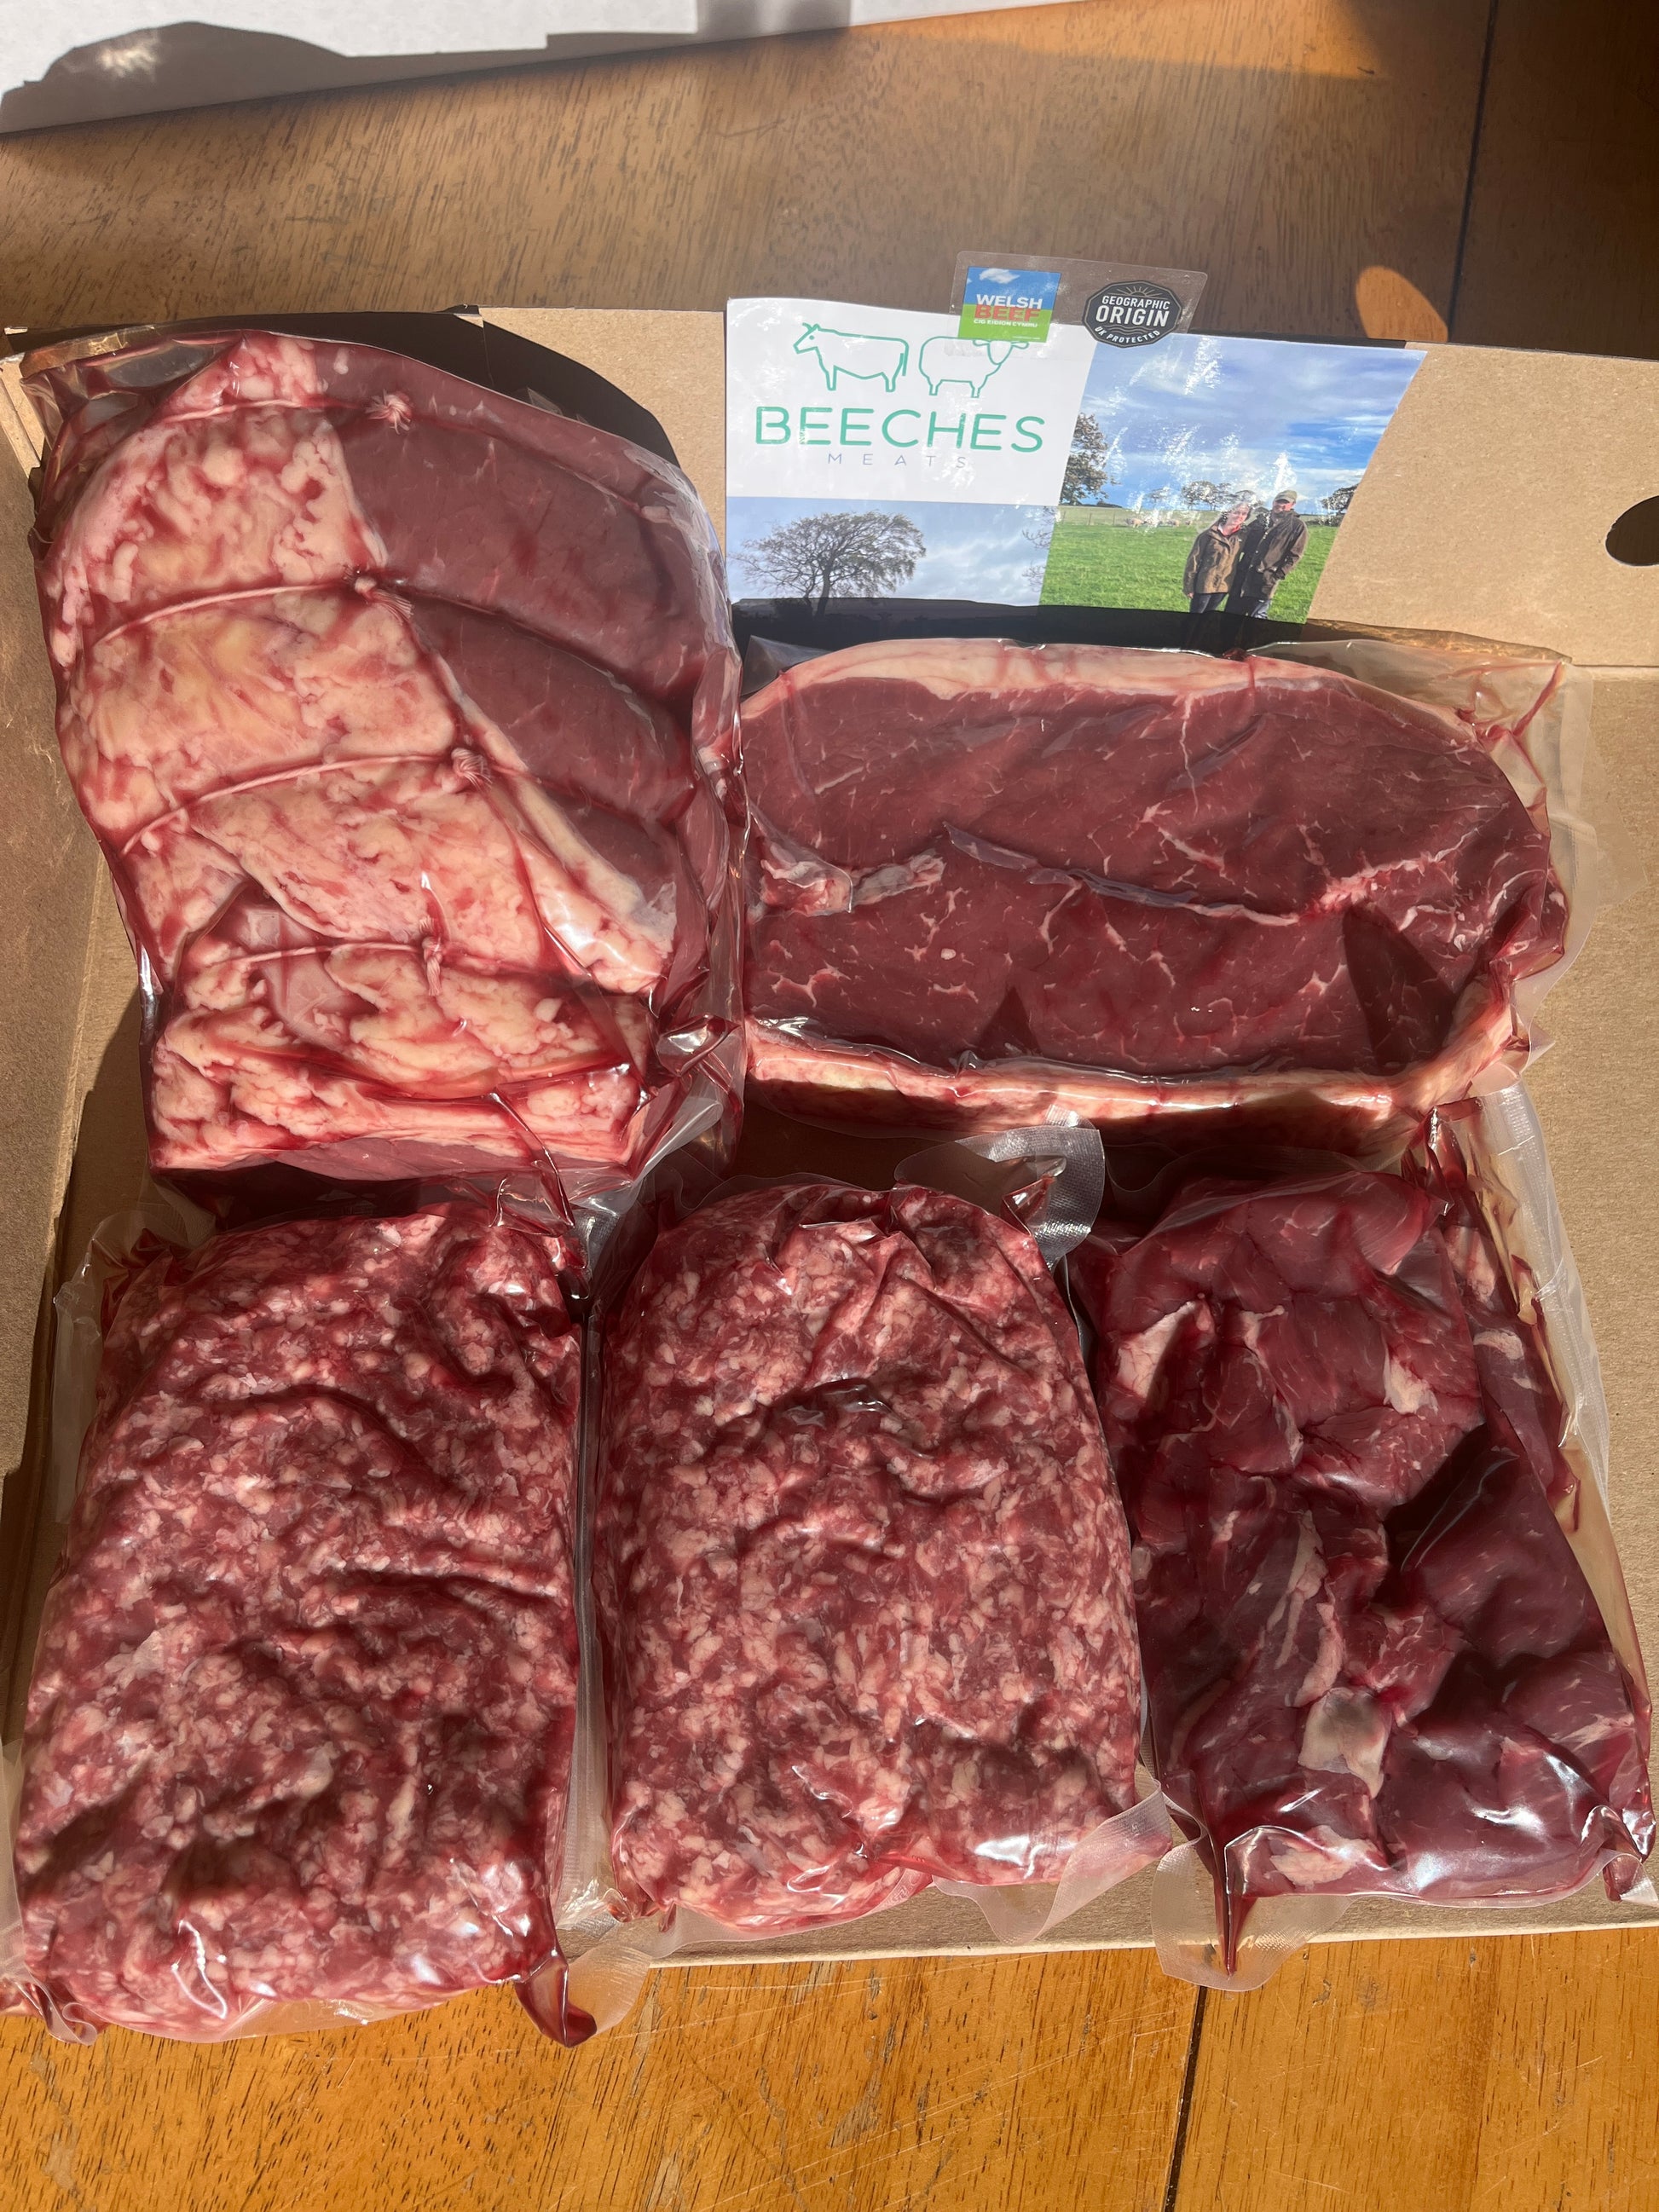 Taster Box. Includes grassfed Welsh beef from our farm. Includes roasting joint, sirloin steak, minced beef, diced beef, Perfect for cooking.